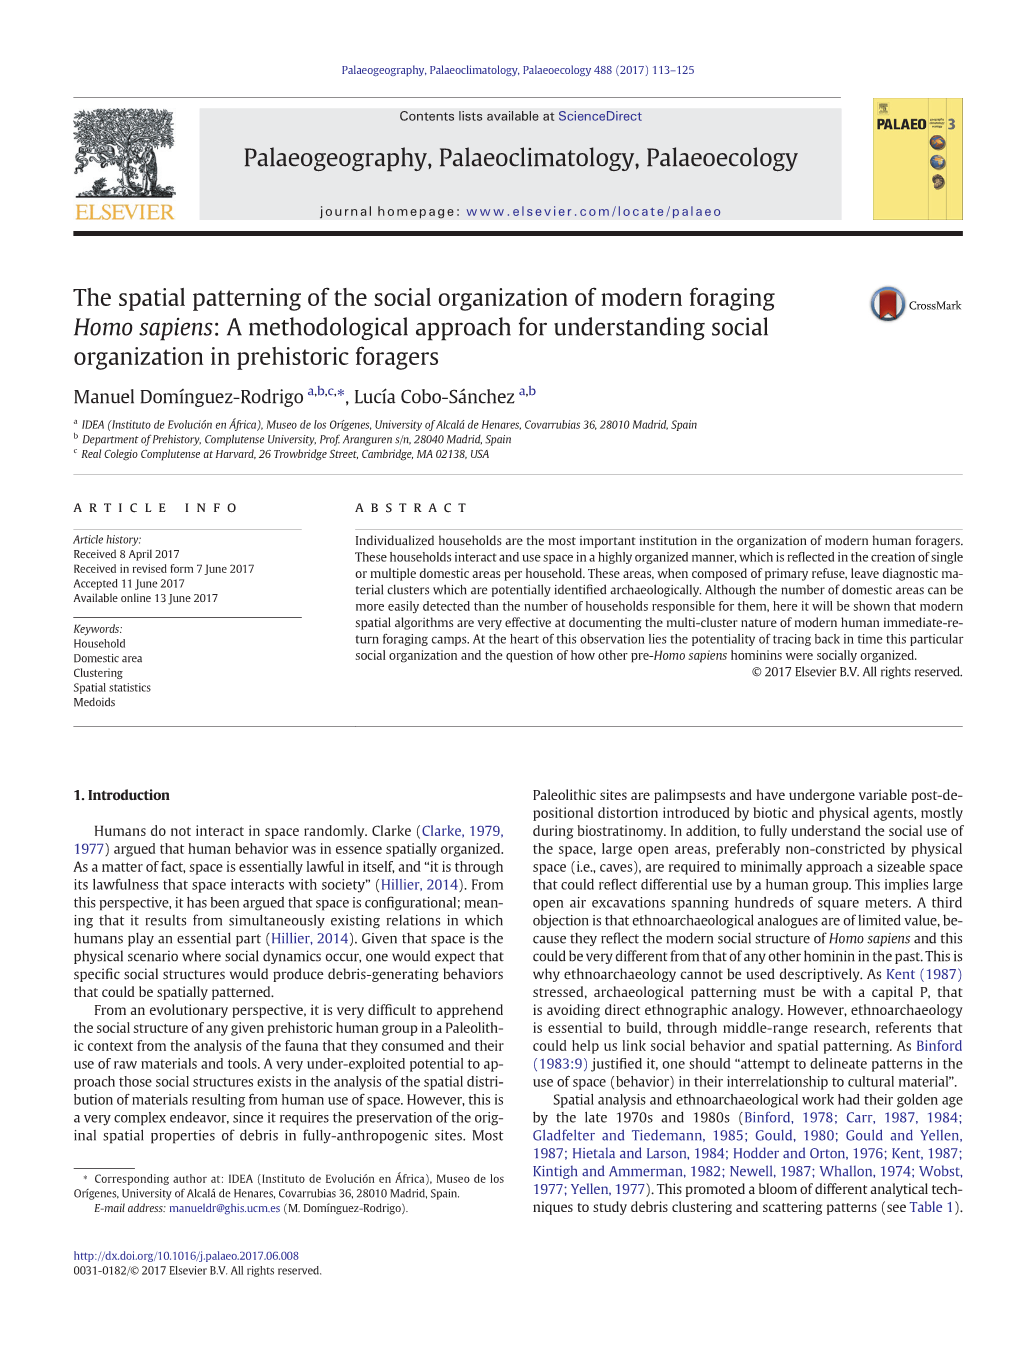 The Spatial Patterning of the Social Organization of Modern Foraging